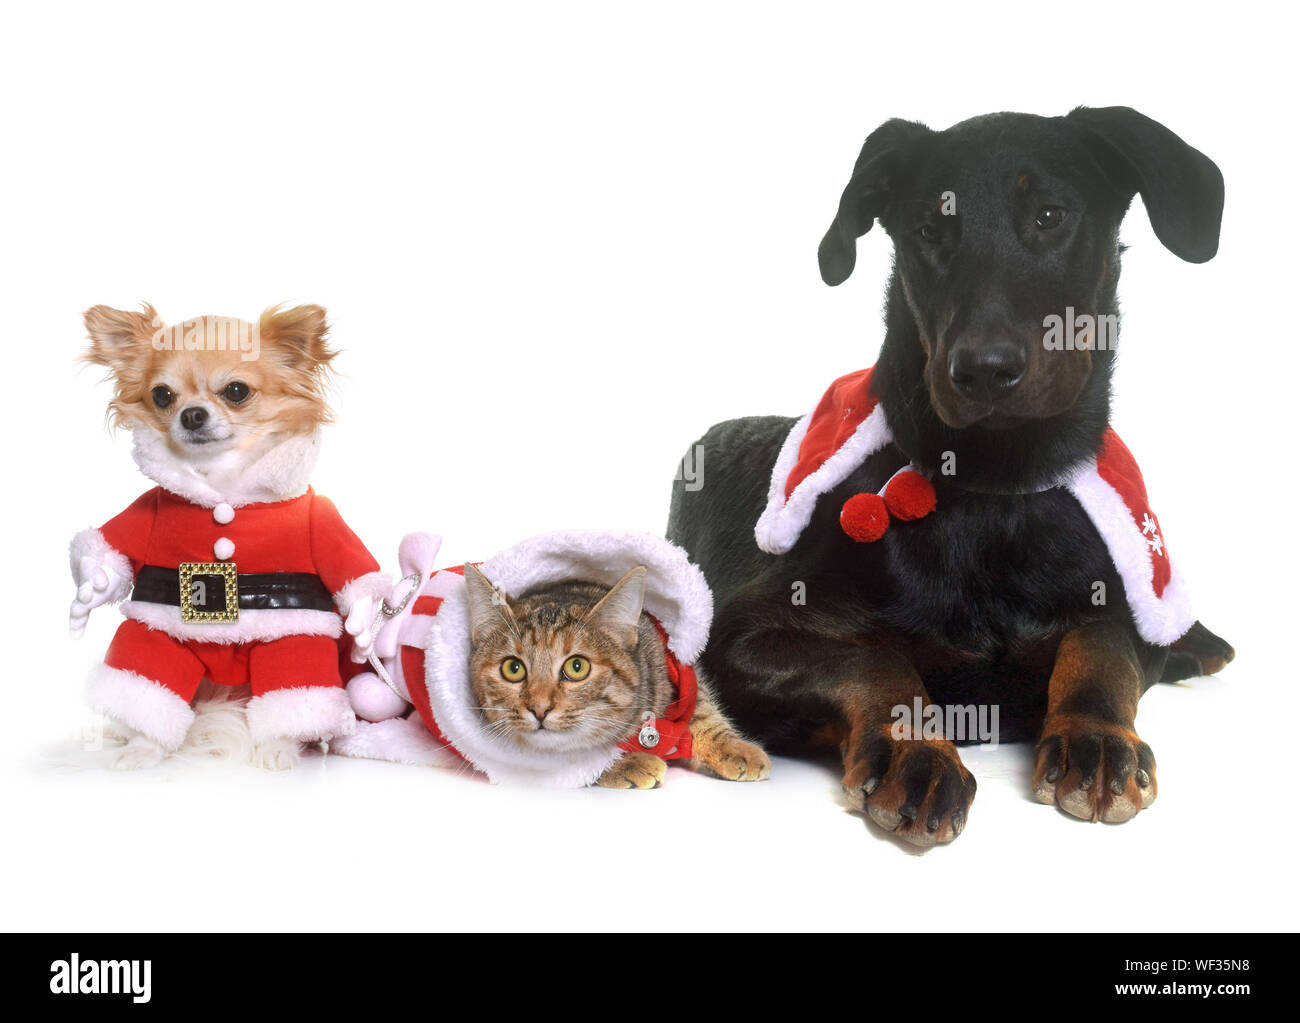 Pets Wearing Christmas Costume Against White Background Stock Photo